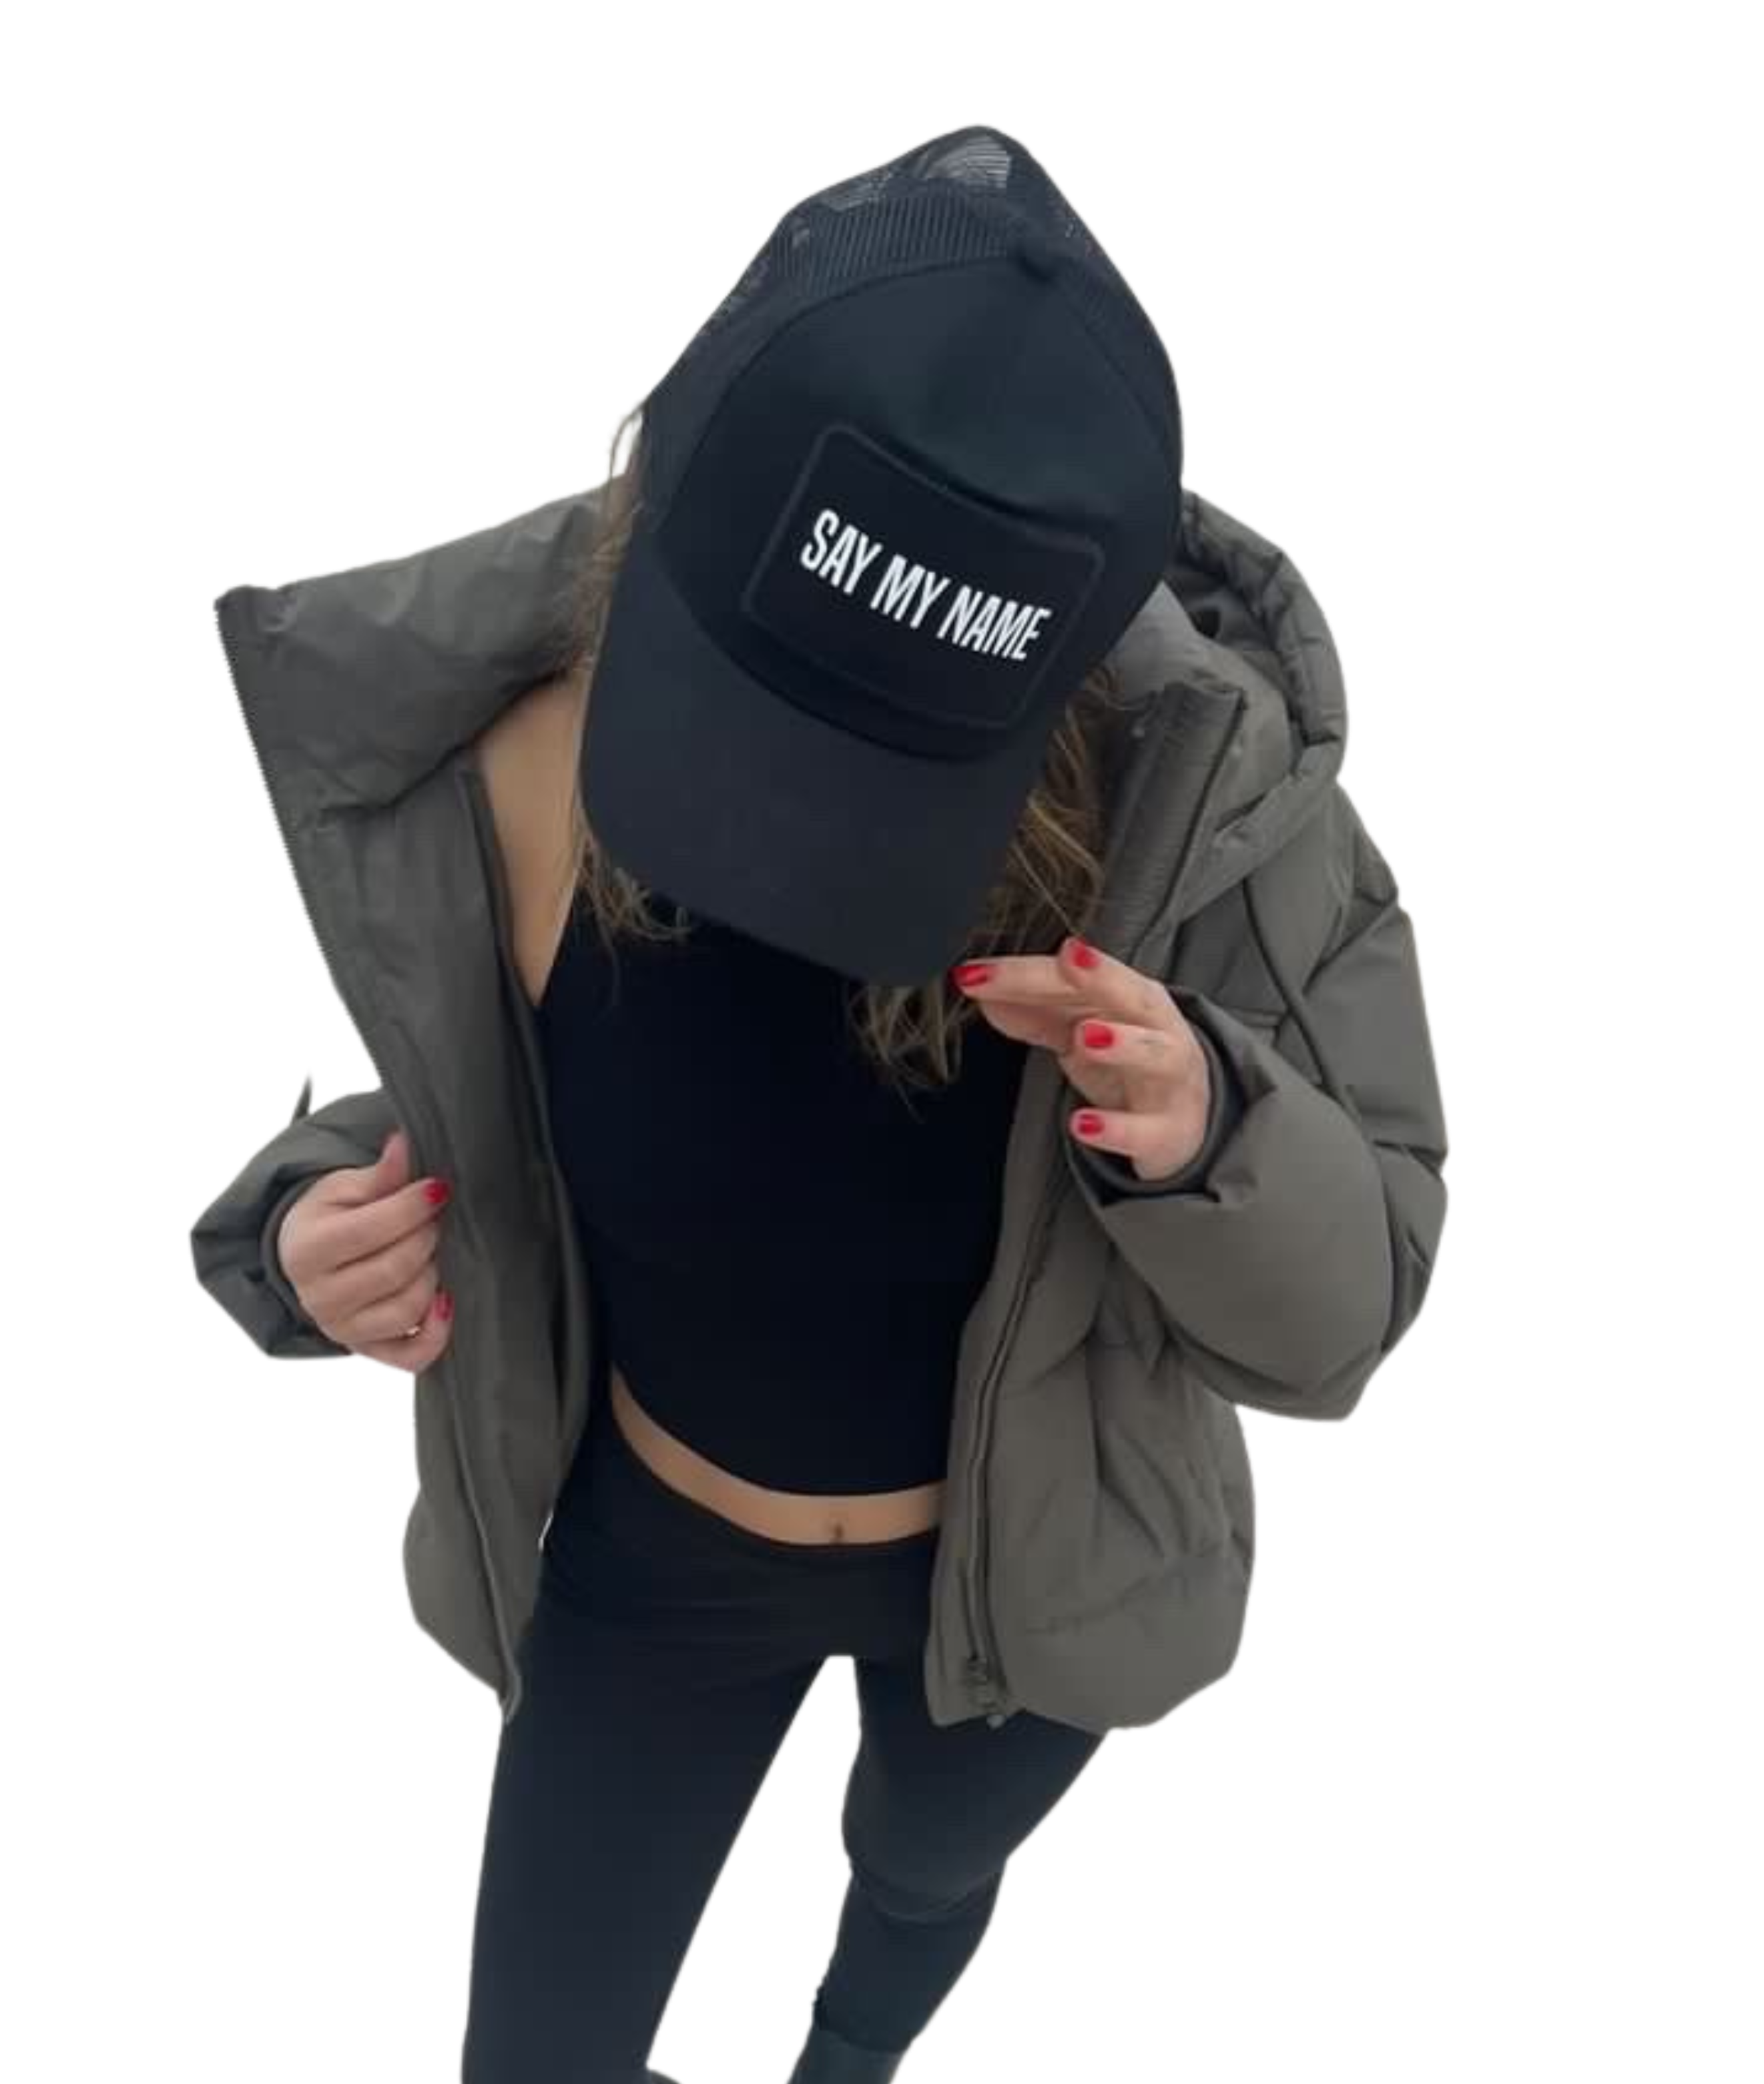 Casquette Unisexe avec patch amovible CSG "SAY MY NAME"